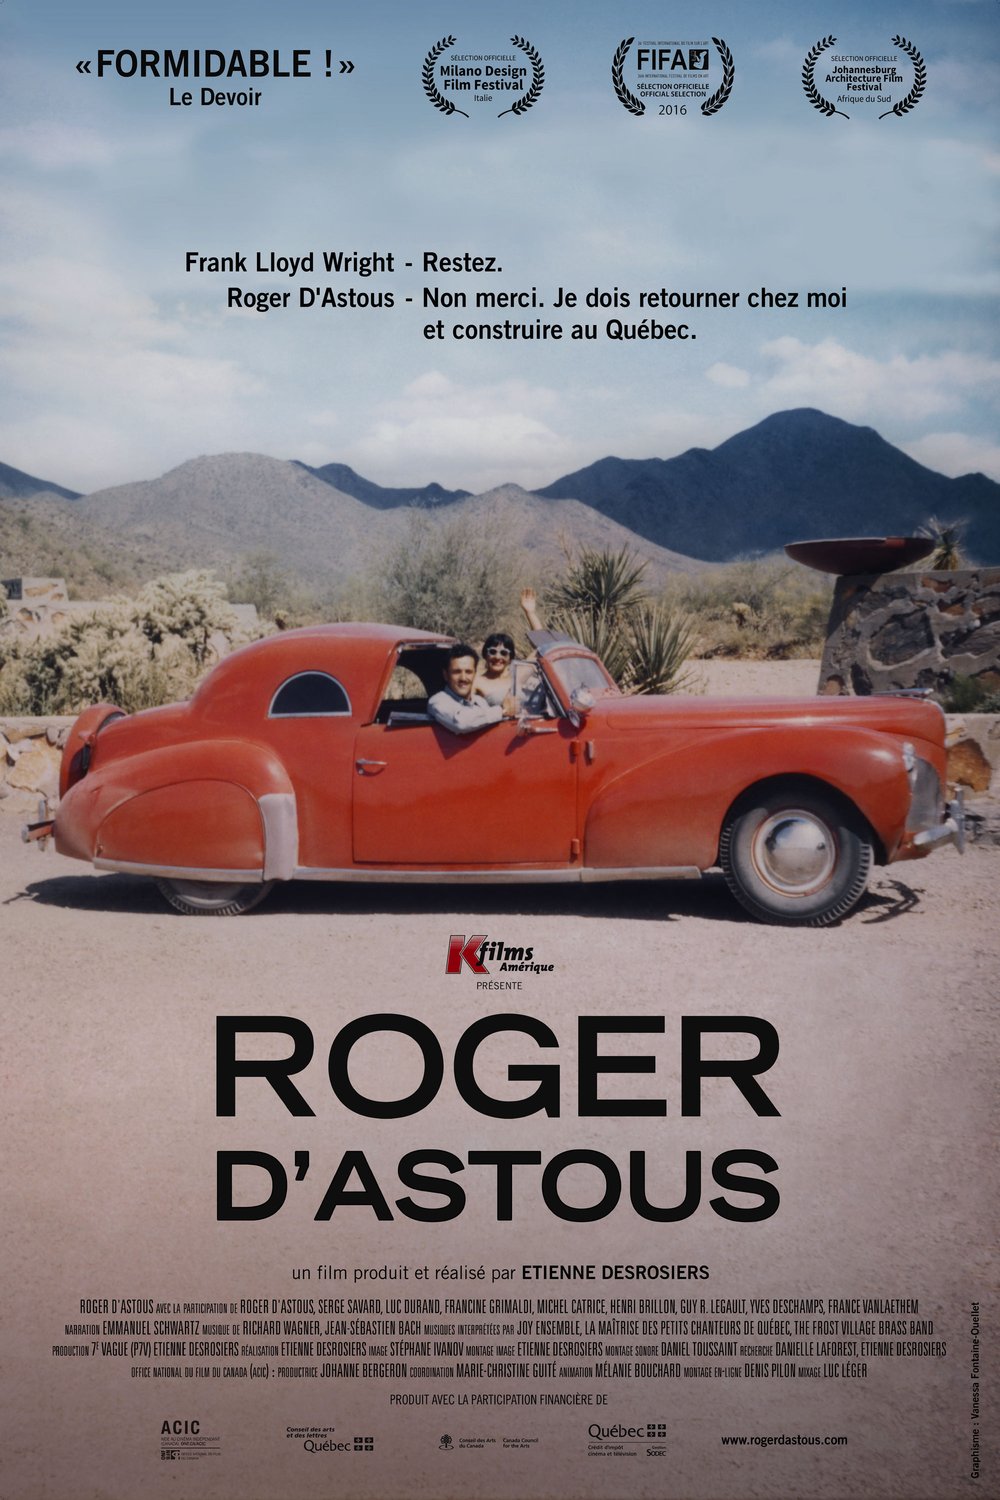 Poster of the movie Roger D'Astous